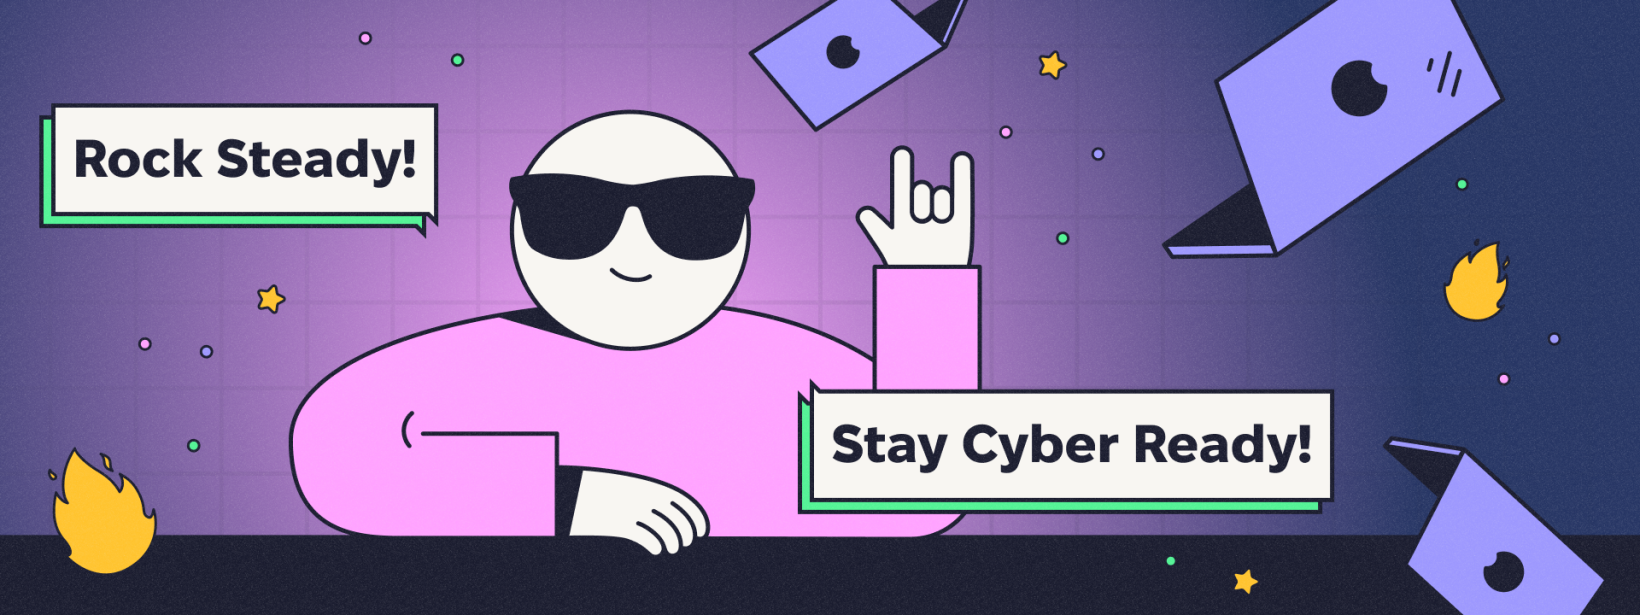 Banner that says "Rock steady! Stay Cyber Ready!"